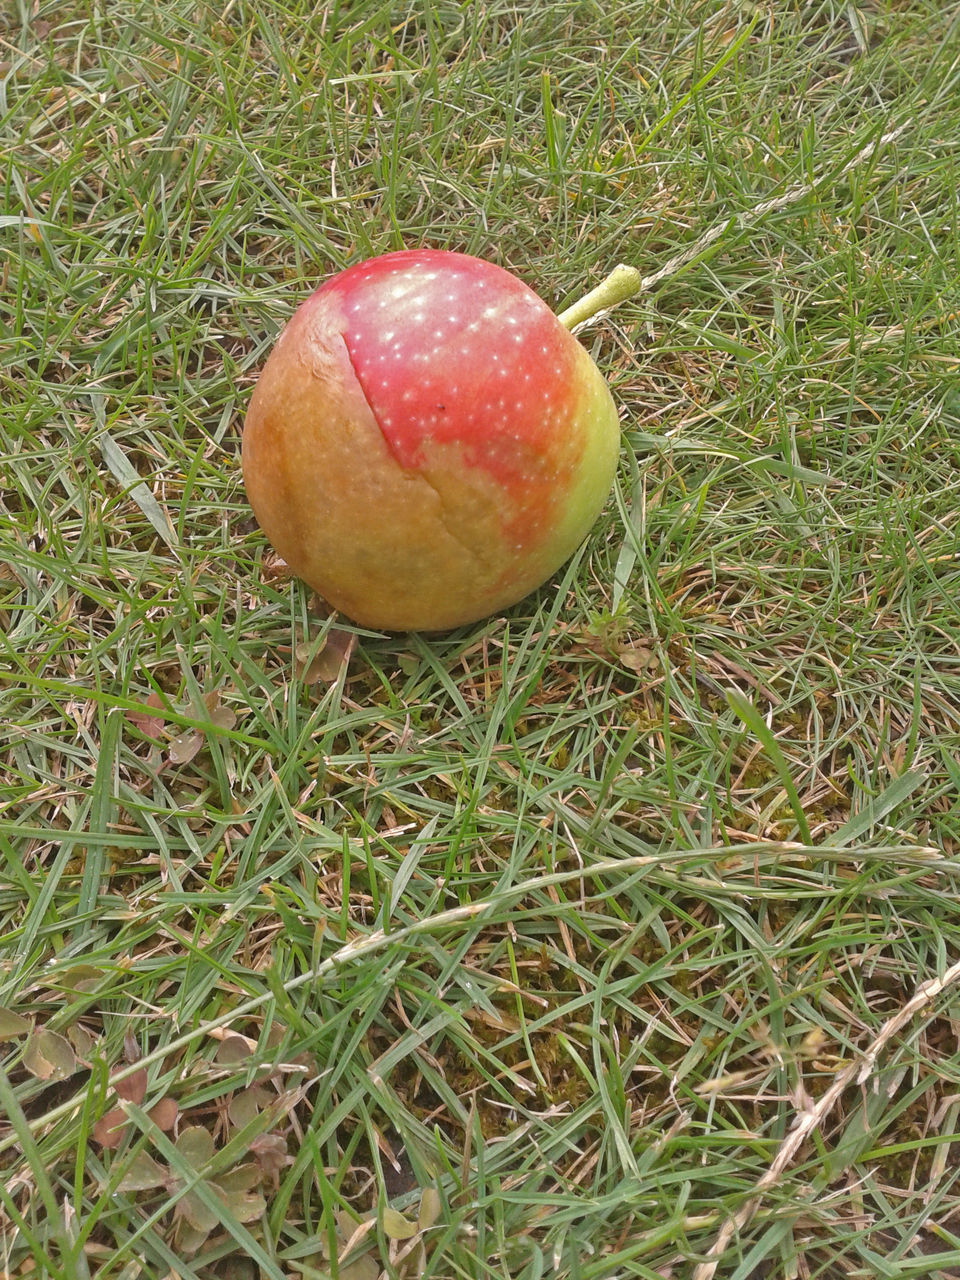 CLOSE-UP OF APPLE ON FIELD